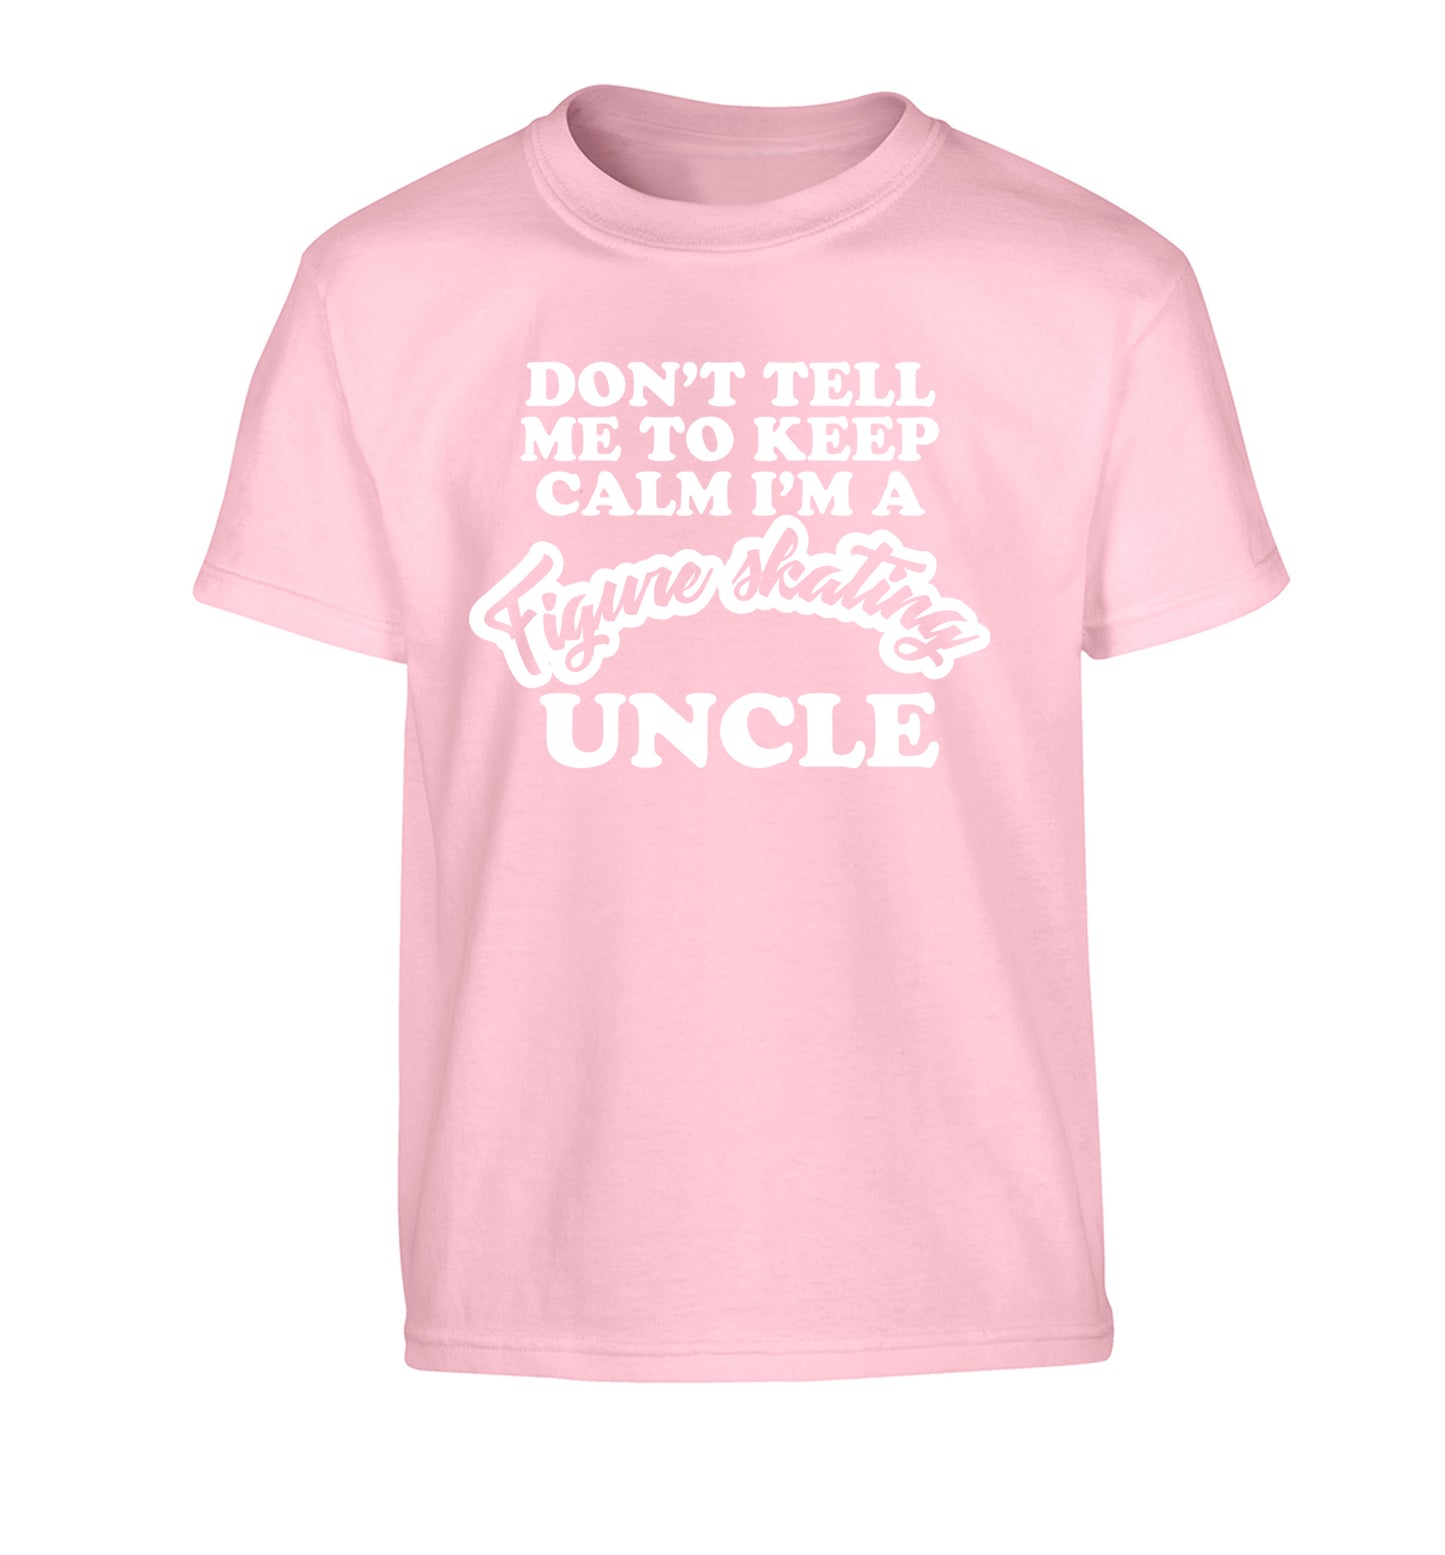 Don't tell me to keep calm I'm a figure skating uncle Children's light pink Tshirt 12-14 Years